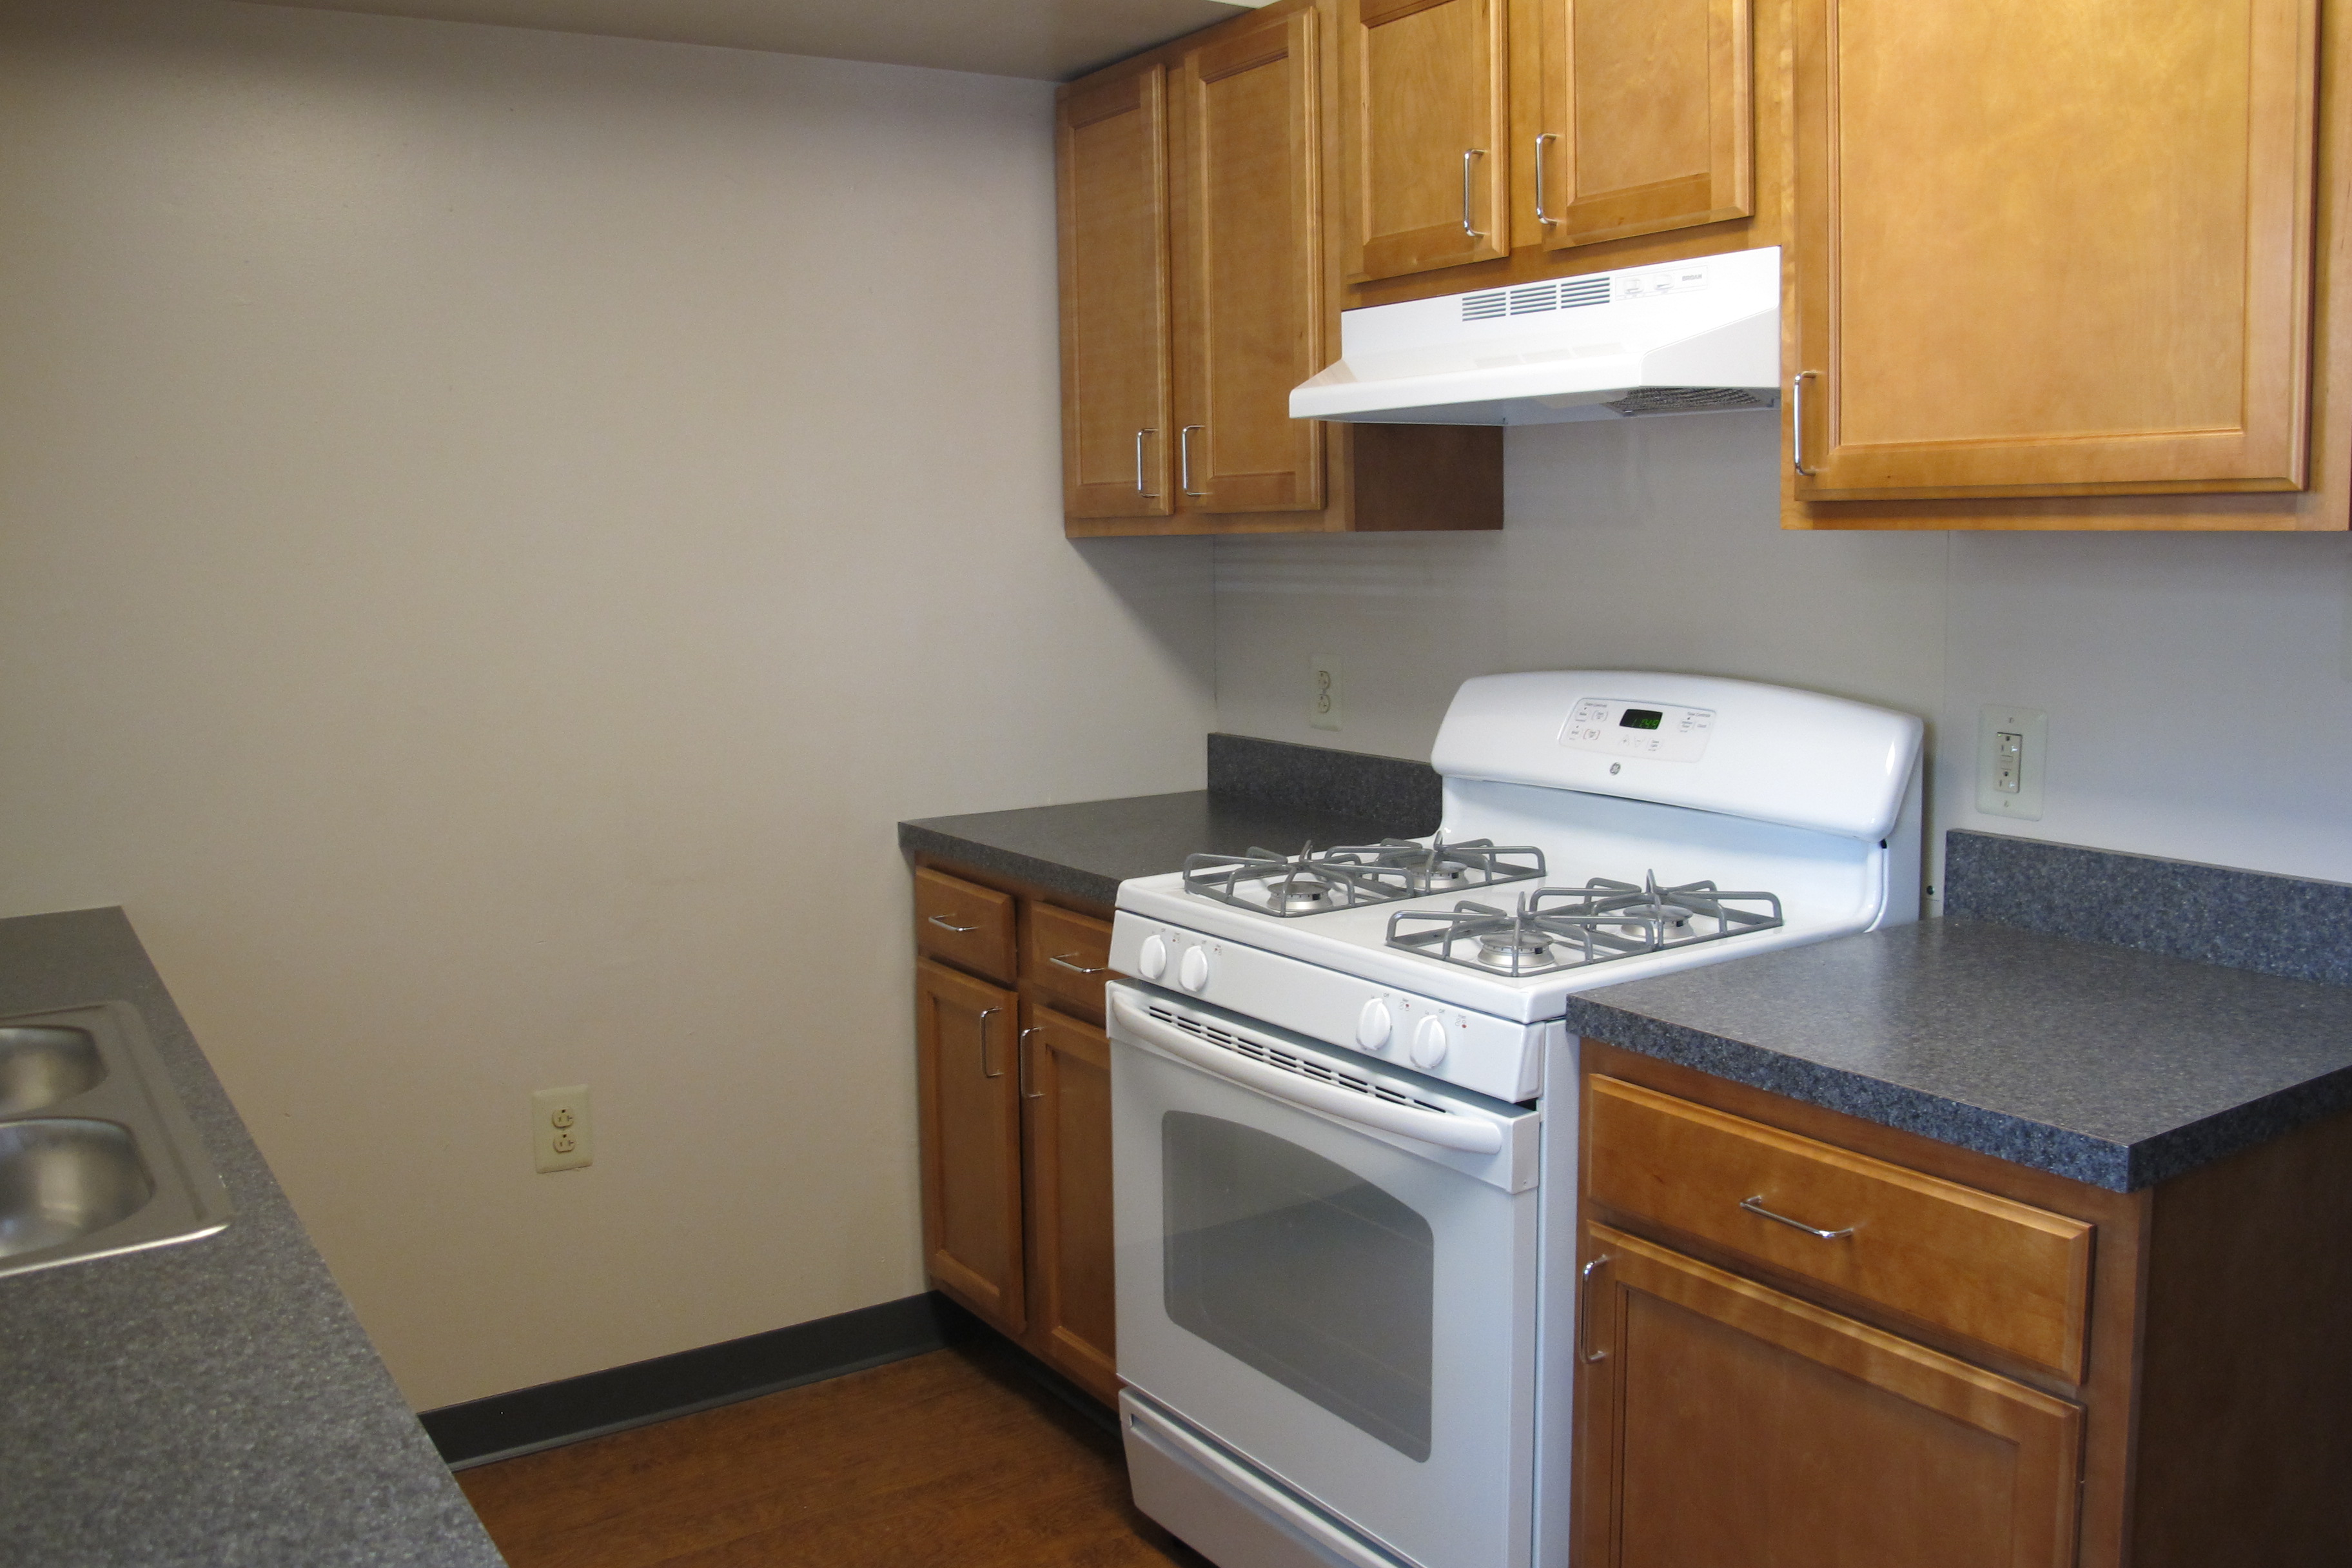 A refreshed kitchen in Villanueva, featuring new appliances, counters, and cabinets.